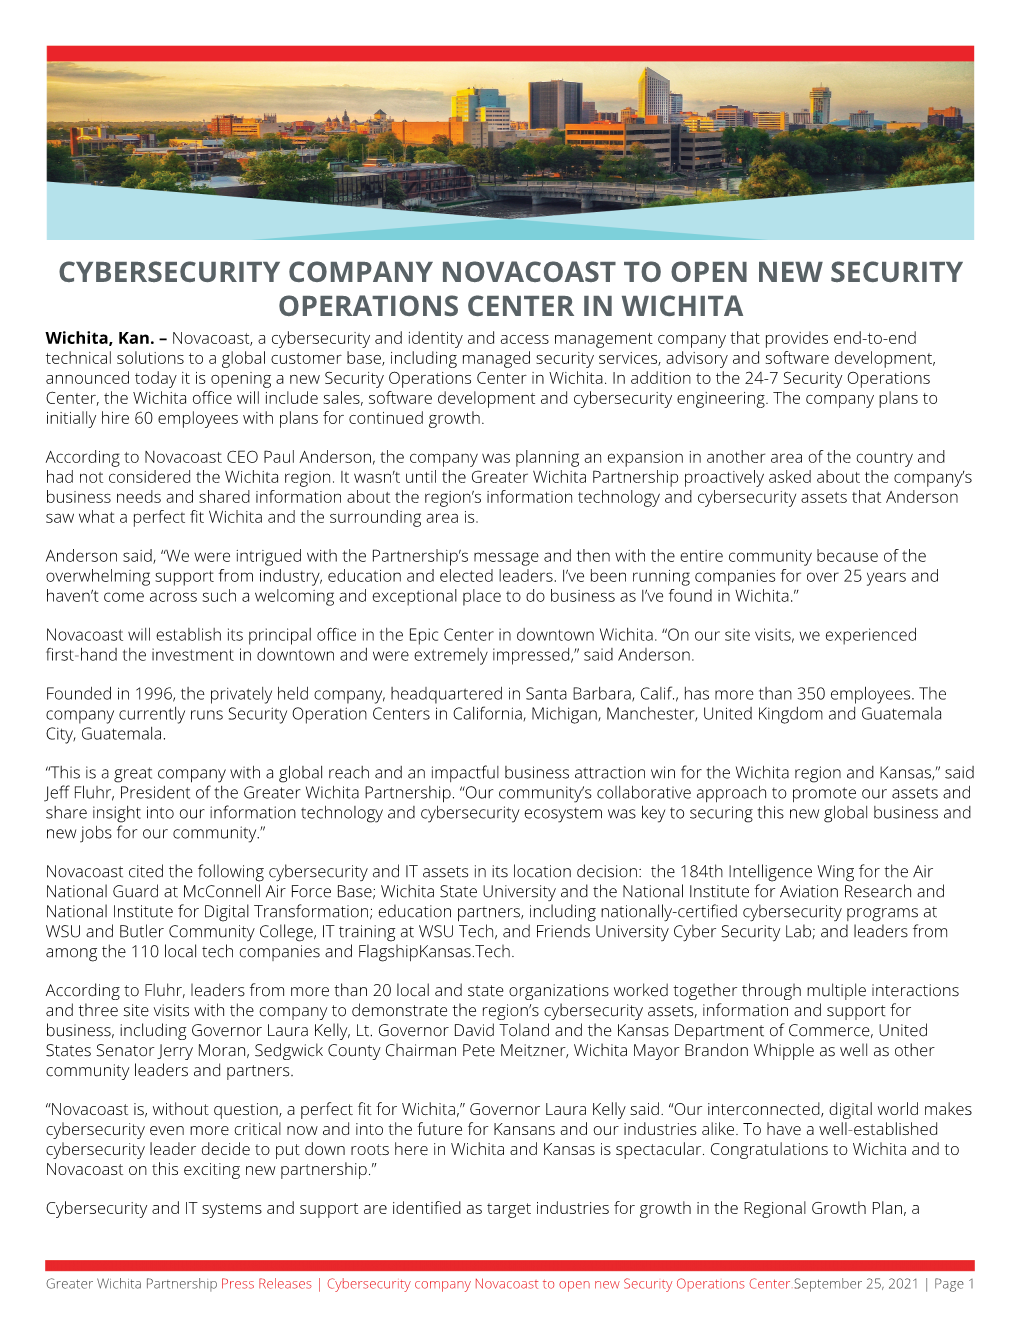 CYBERSECURITY COMPANY NOVACOAST to OPEN NEW SECURITY OPERATIONS CENTER in WICHITA Wichita, Kan